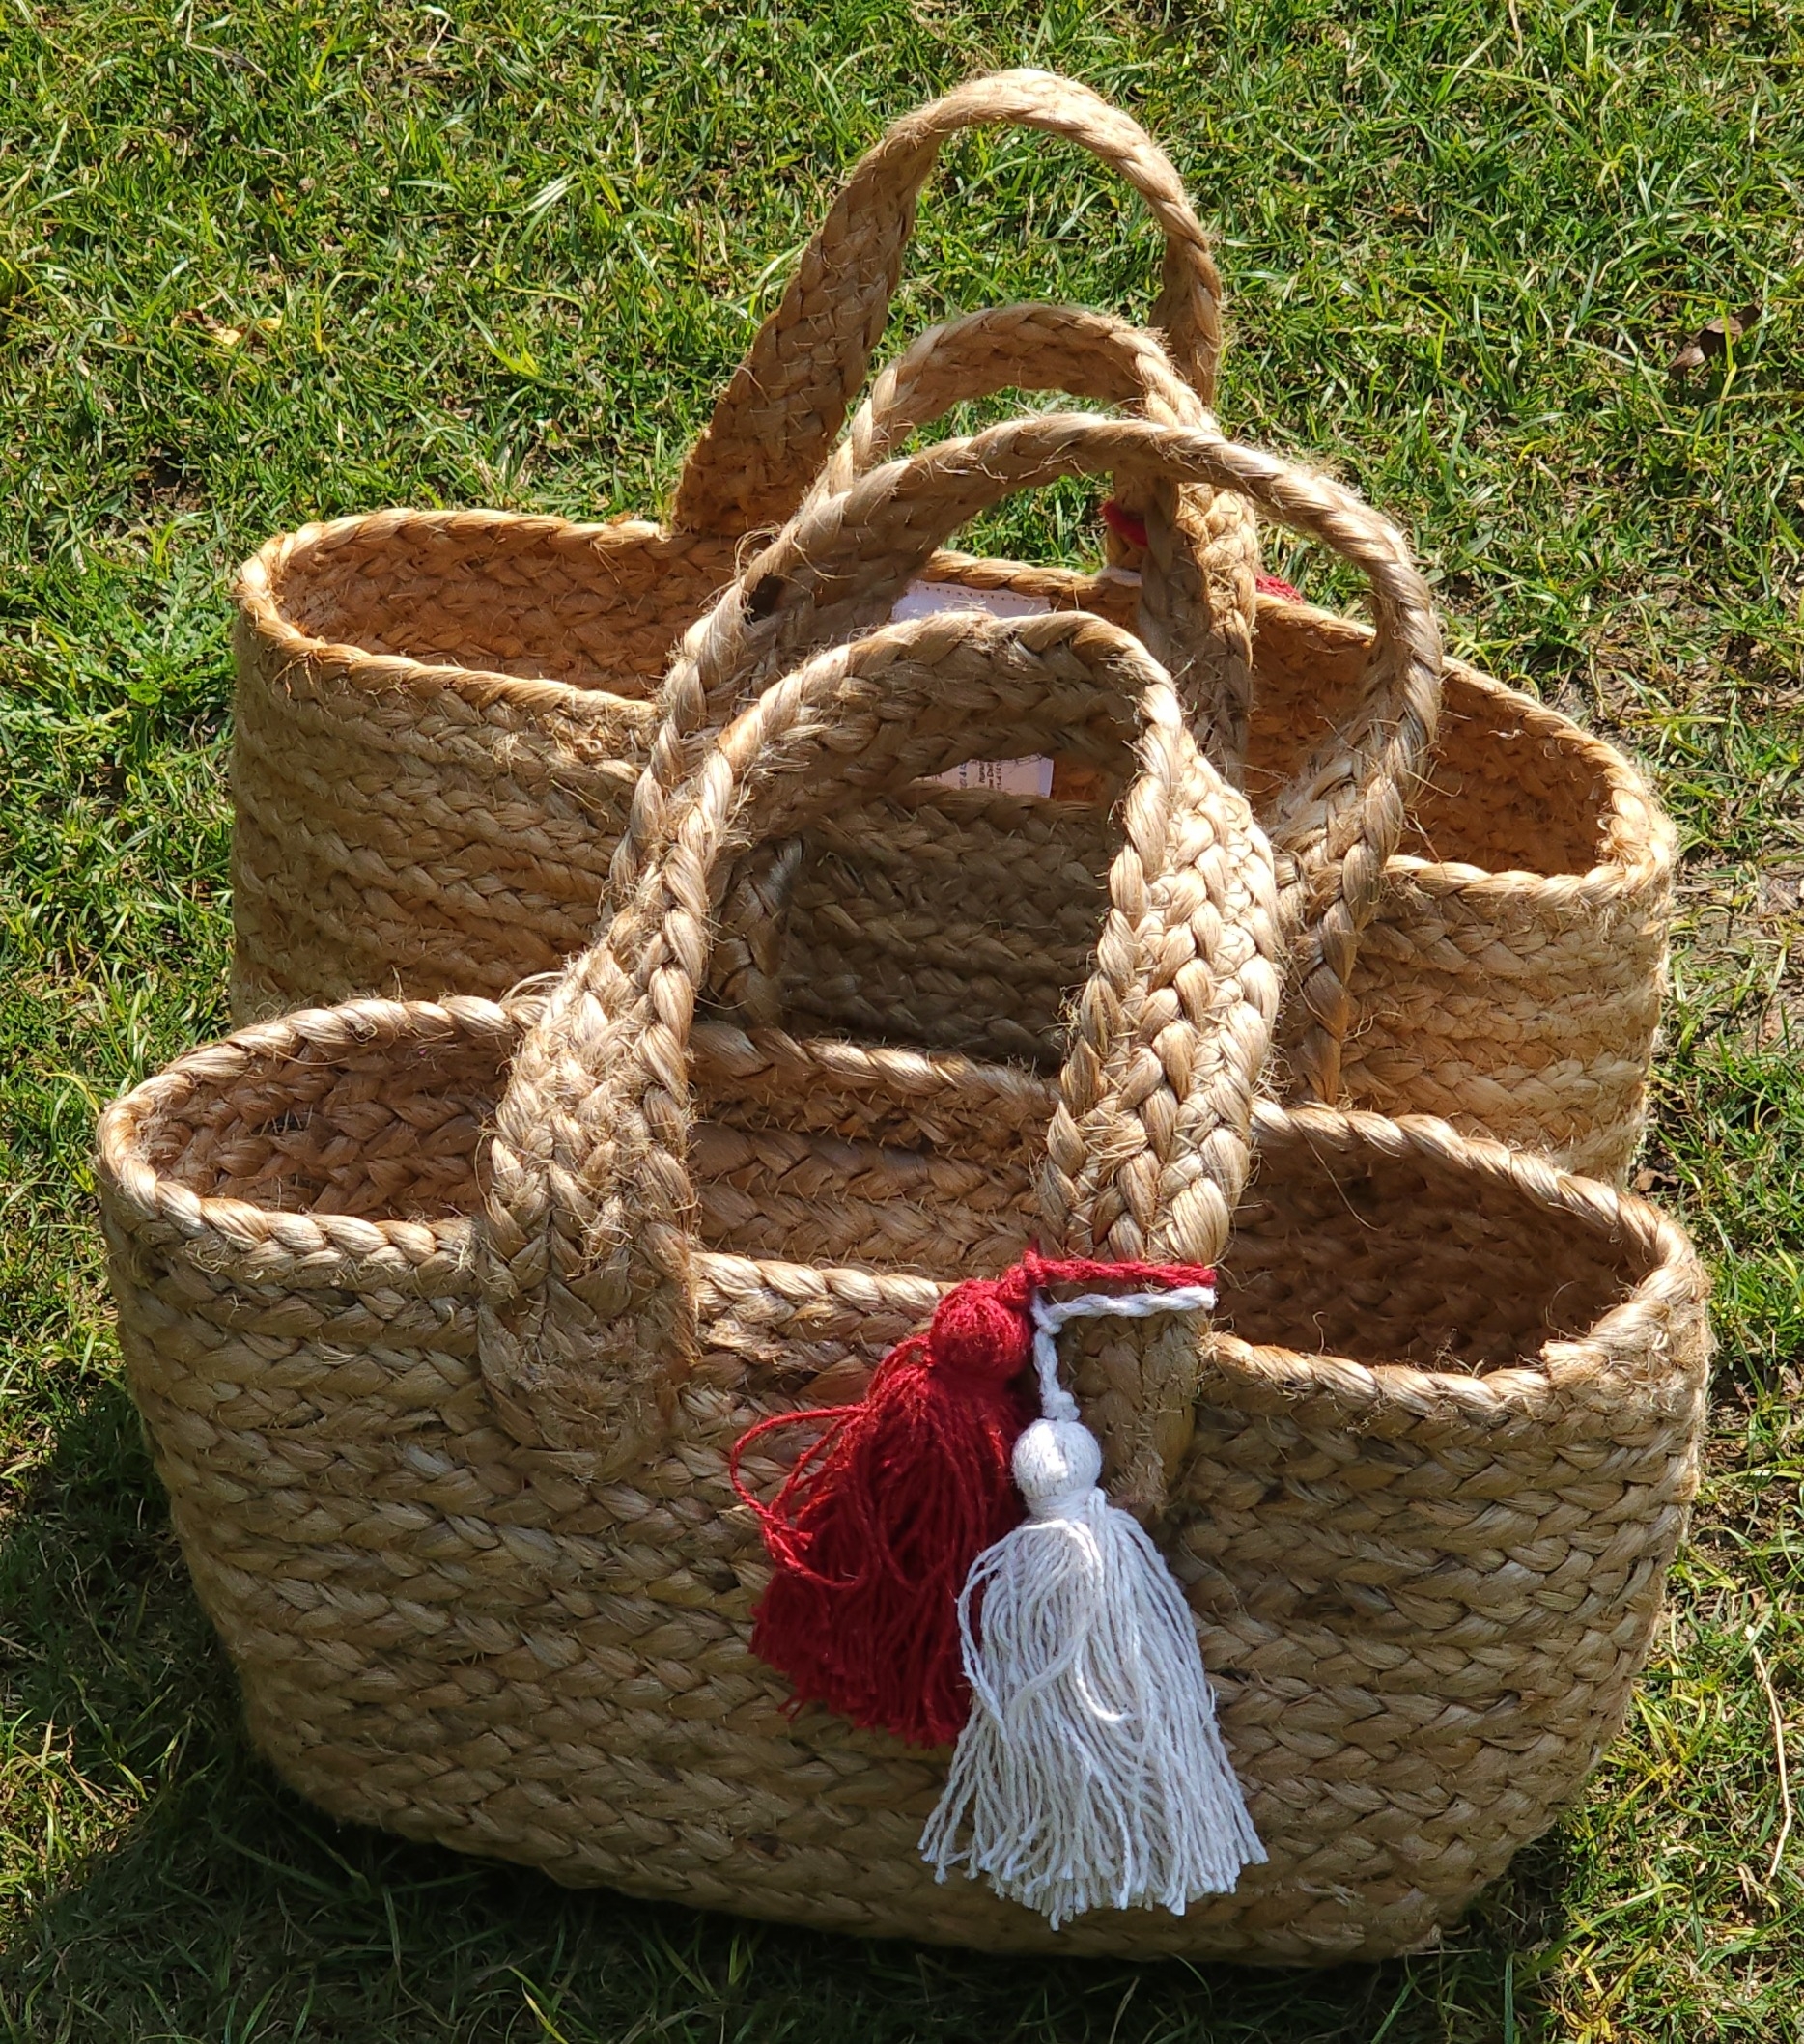 Handknitted jute basket / hamper basket light weighted and easy to carry